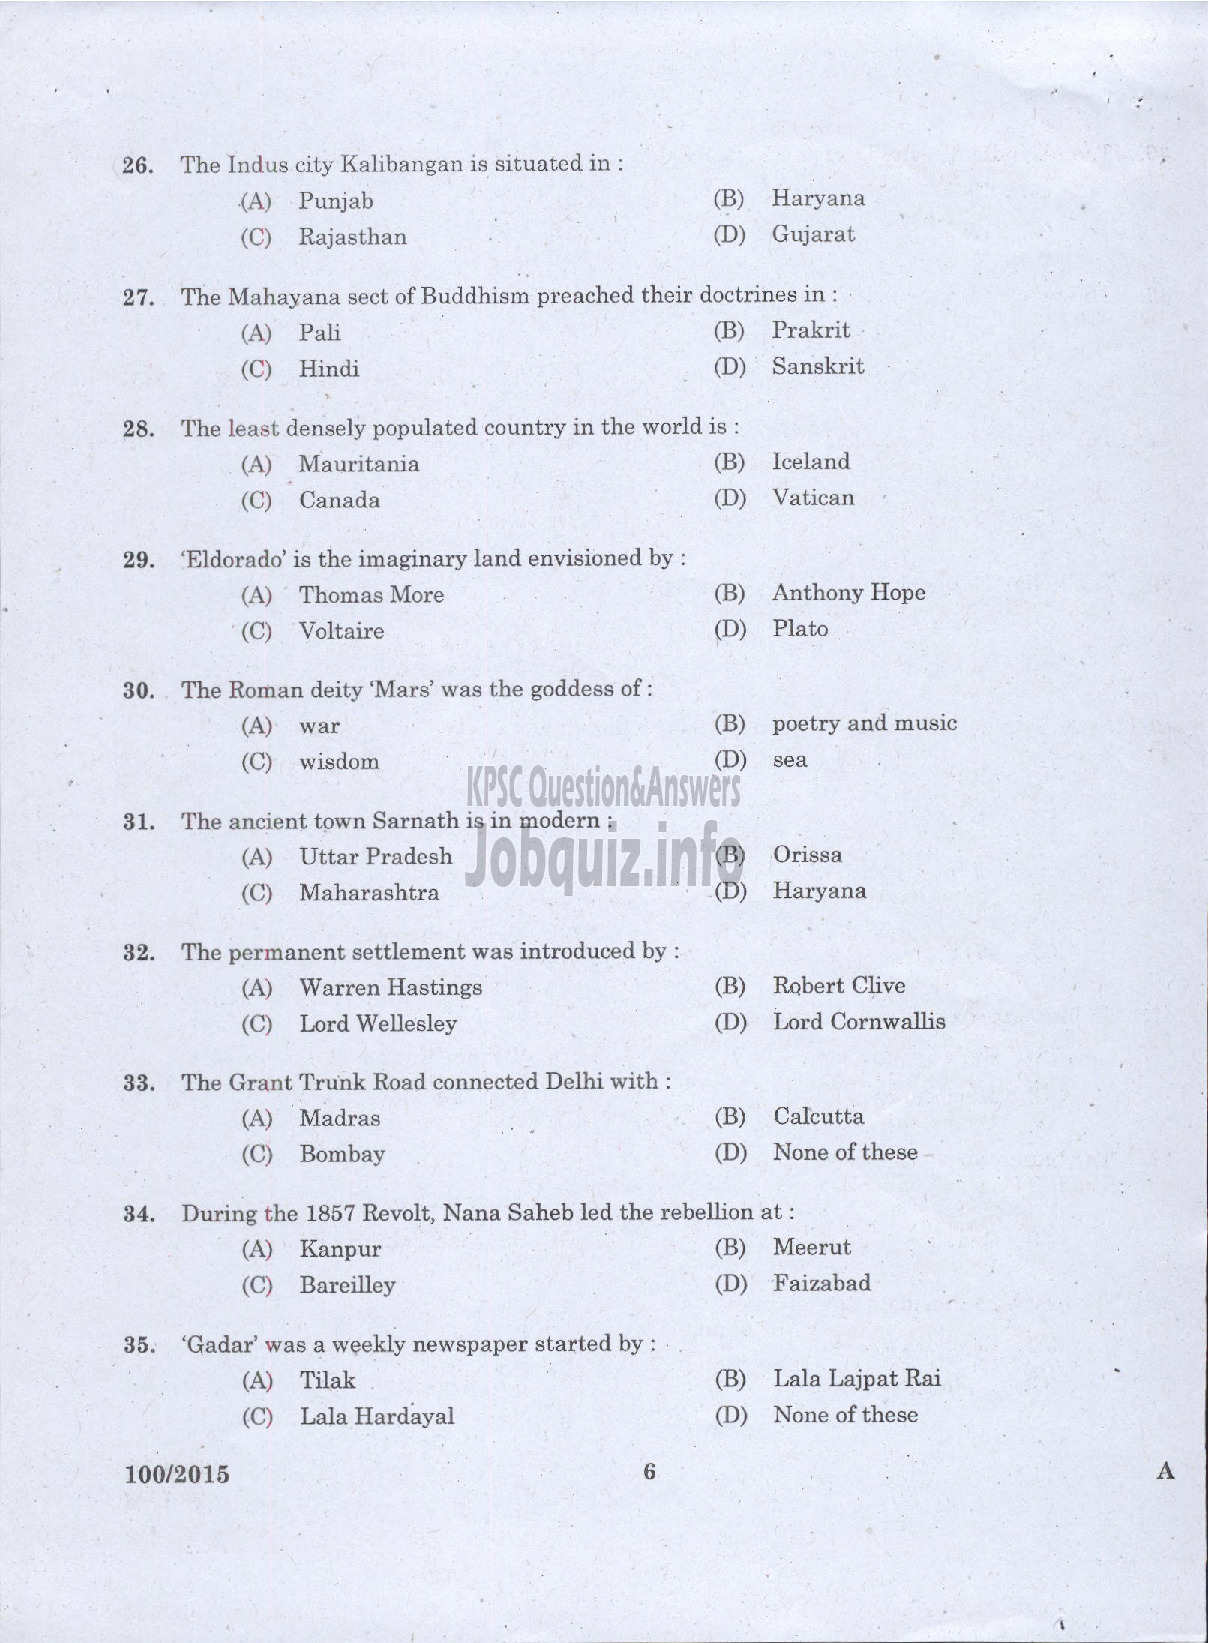 Kerala PSC Question Paper - TYYPIST GRADE II / STENO TYPIST / CLERK TYPIST / TYPIST KERALA STATE HOUSING BOARD / KERALA SHIPPING AND INLAND NAVIGATION CORP LTD / VARIOUS / KERALA ELECTRICAL AND ALLIED ENGINEERING COMPANY LTD-4